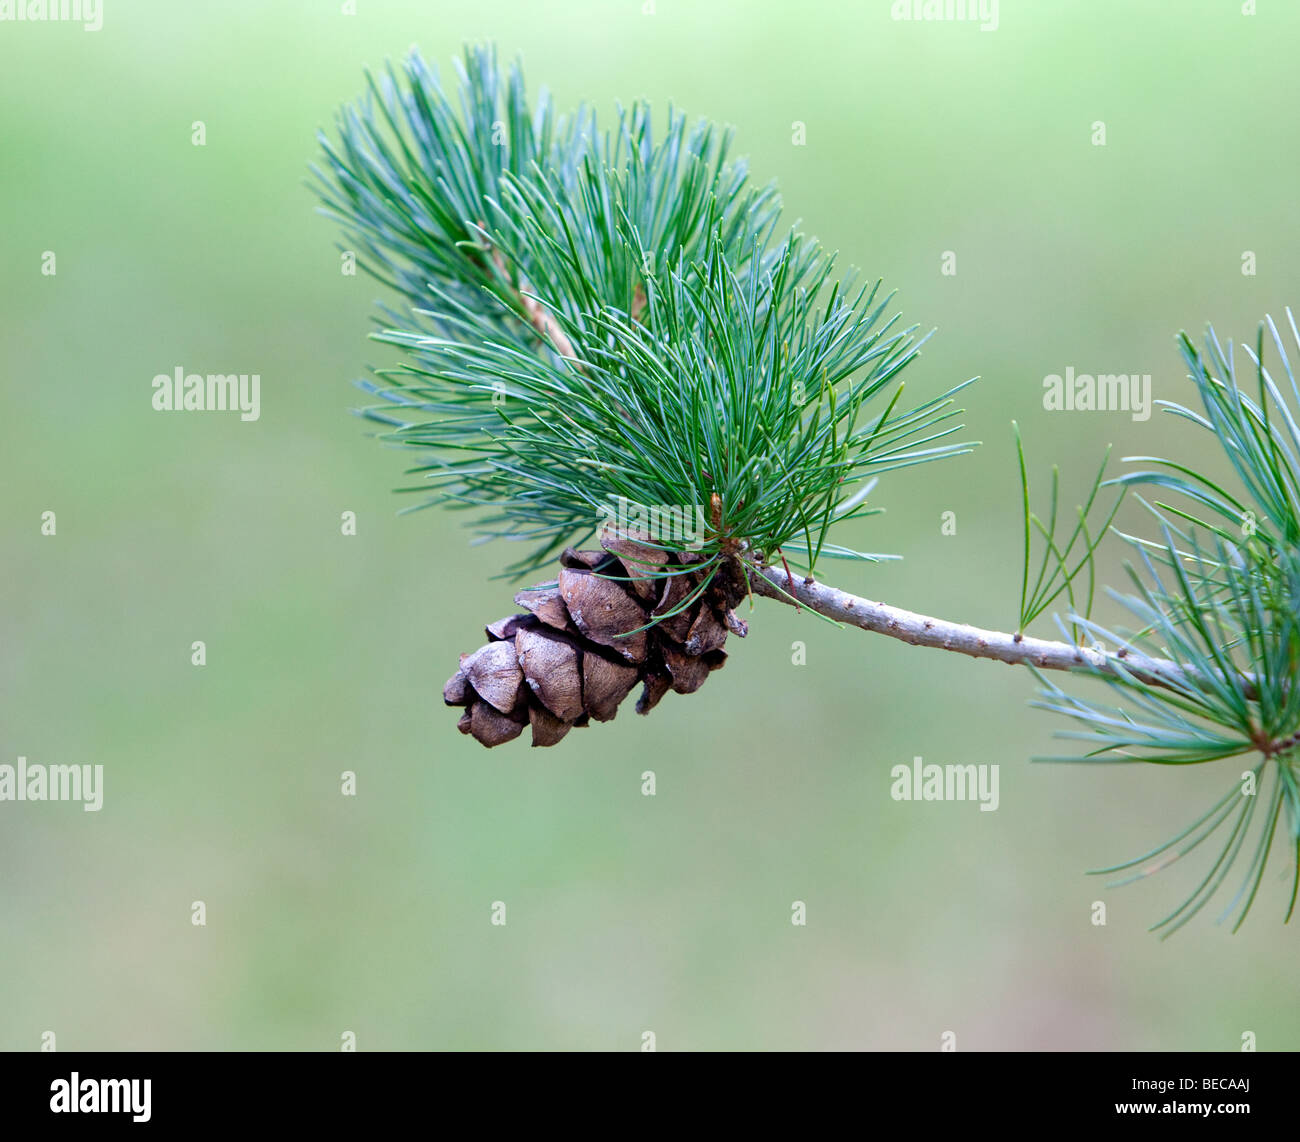 A pine cone at the end of a branch of a Pinus Parviglora Glauca Japanese White Pine. Stock Photo